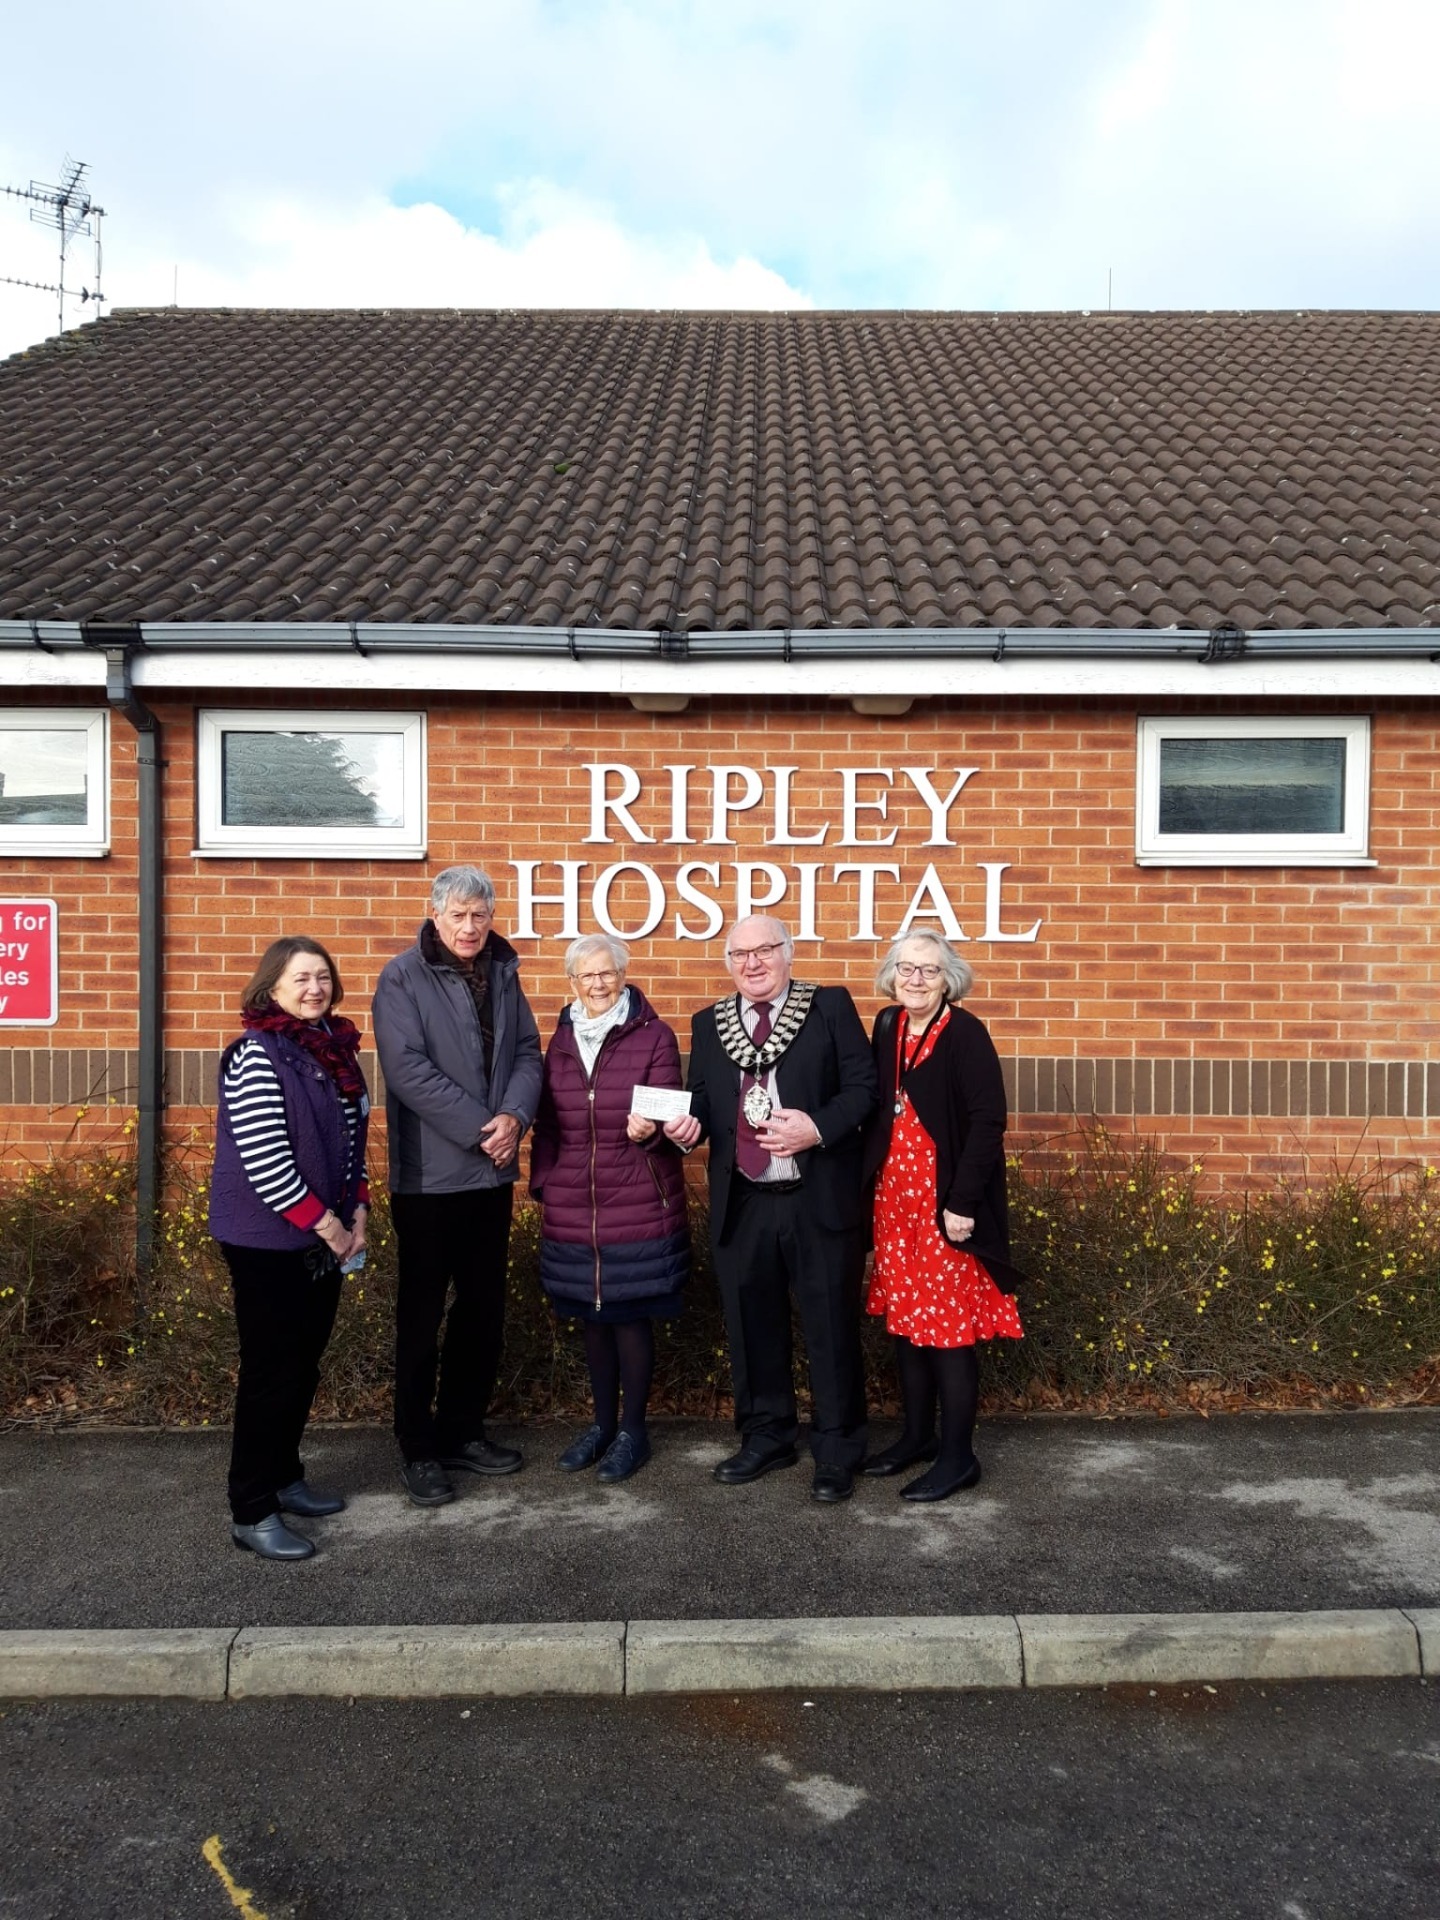 Mayor of Ripley and others stood outside Ripley Hospital for a cheque presentation